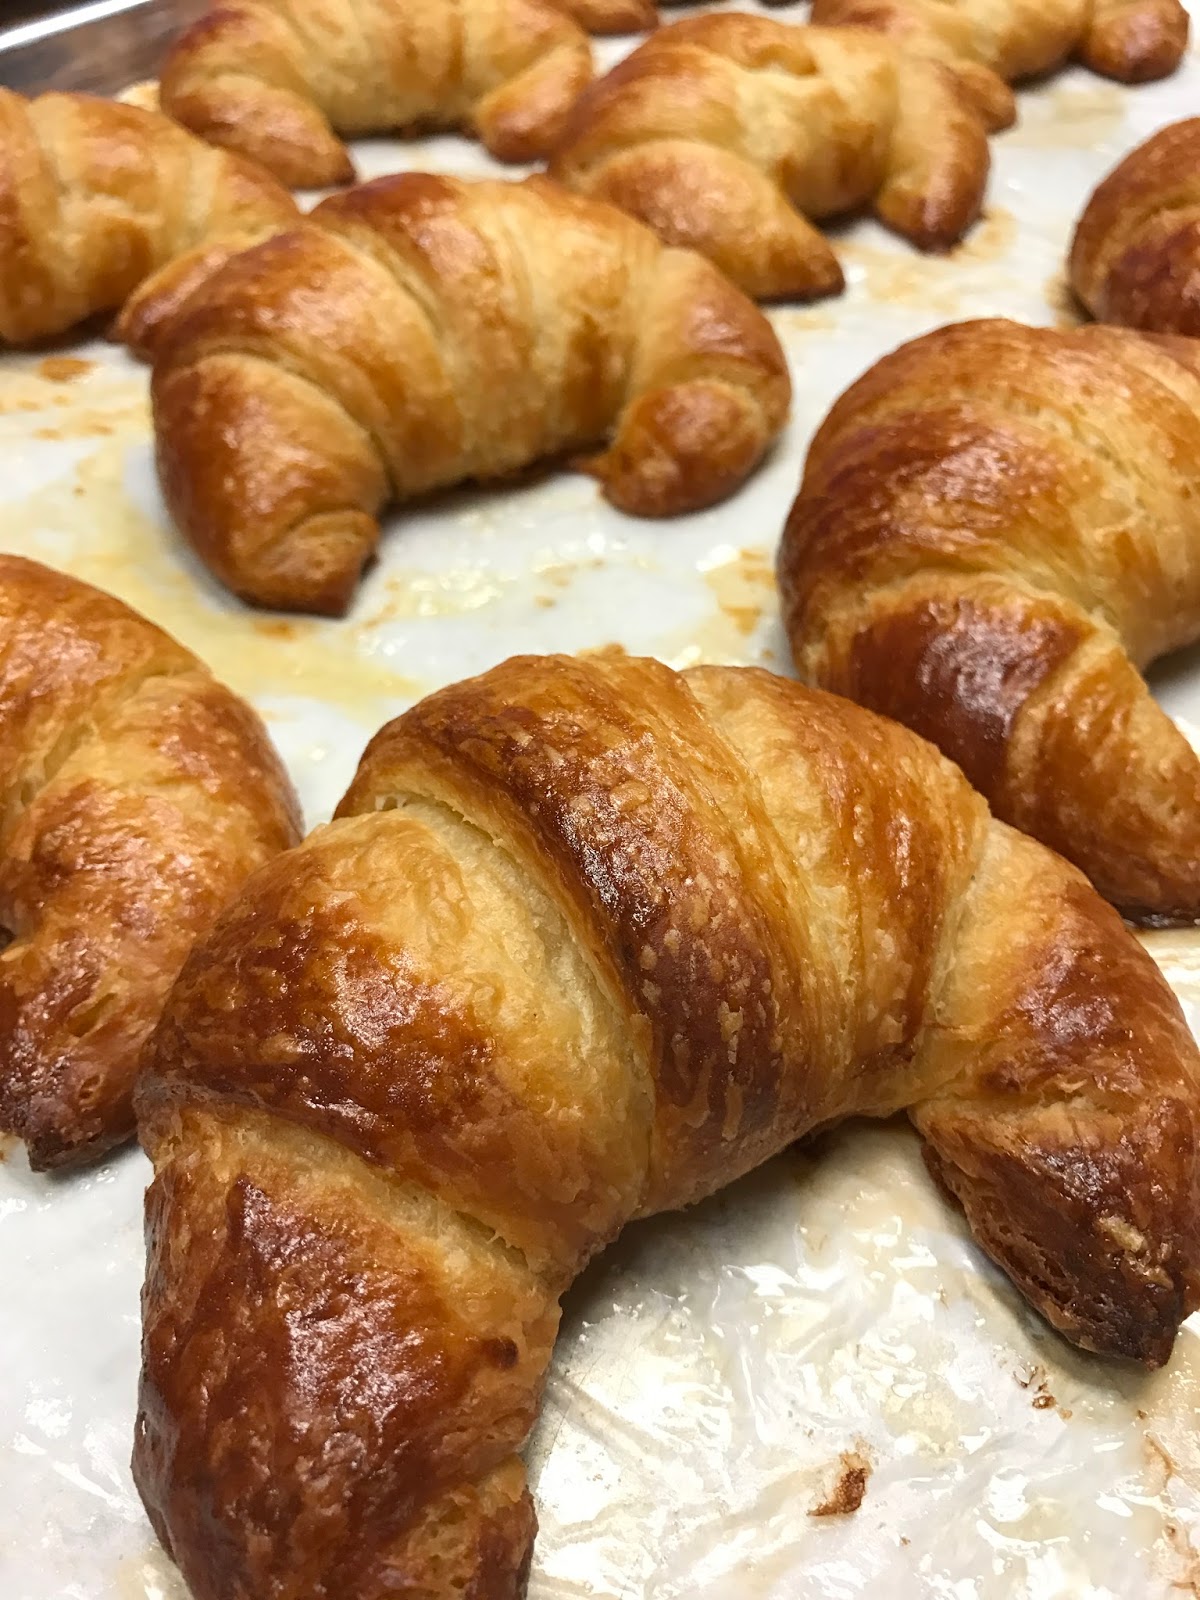 Uptown Update: Celebrate National Croissant Day At Baker & Nosh